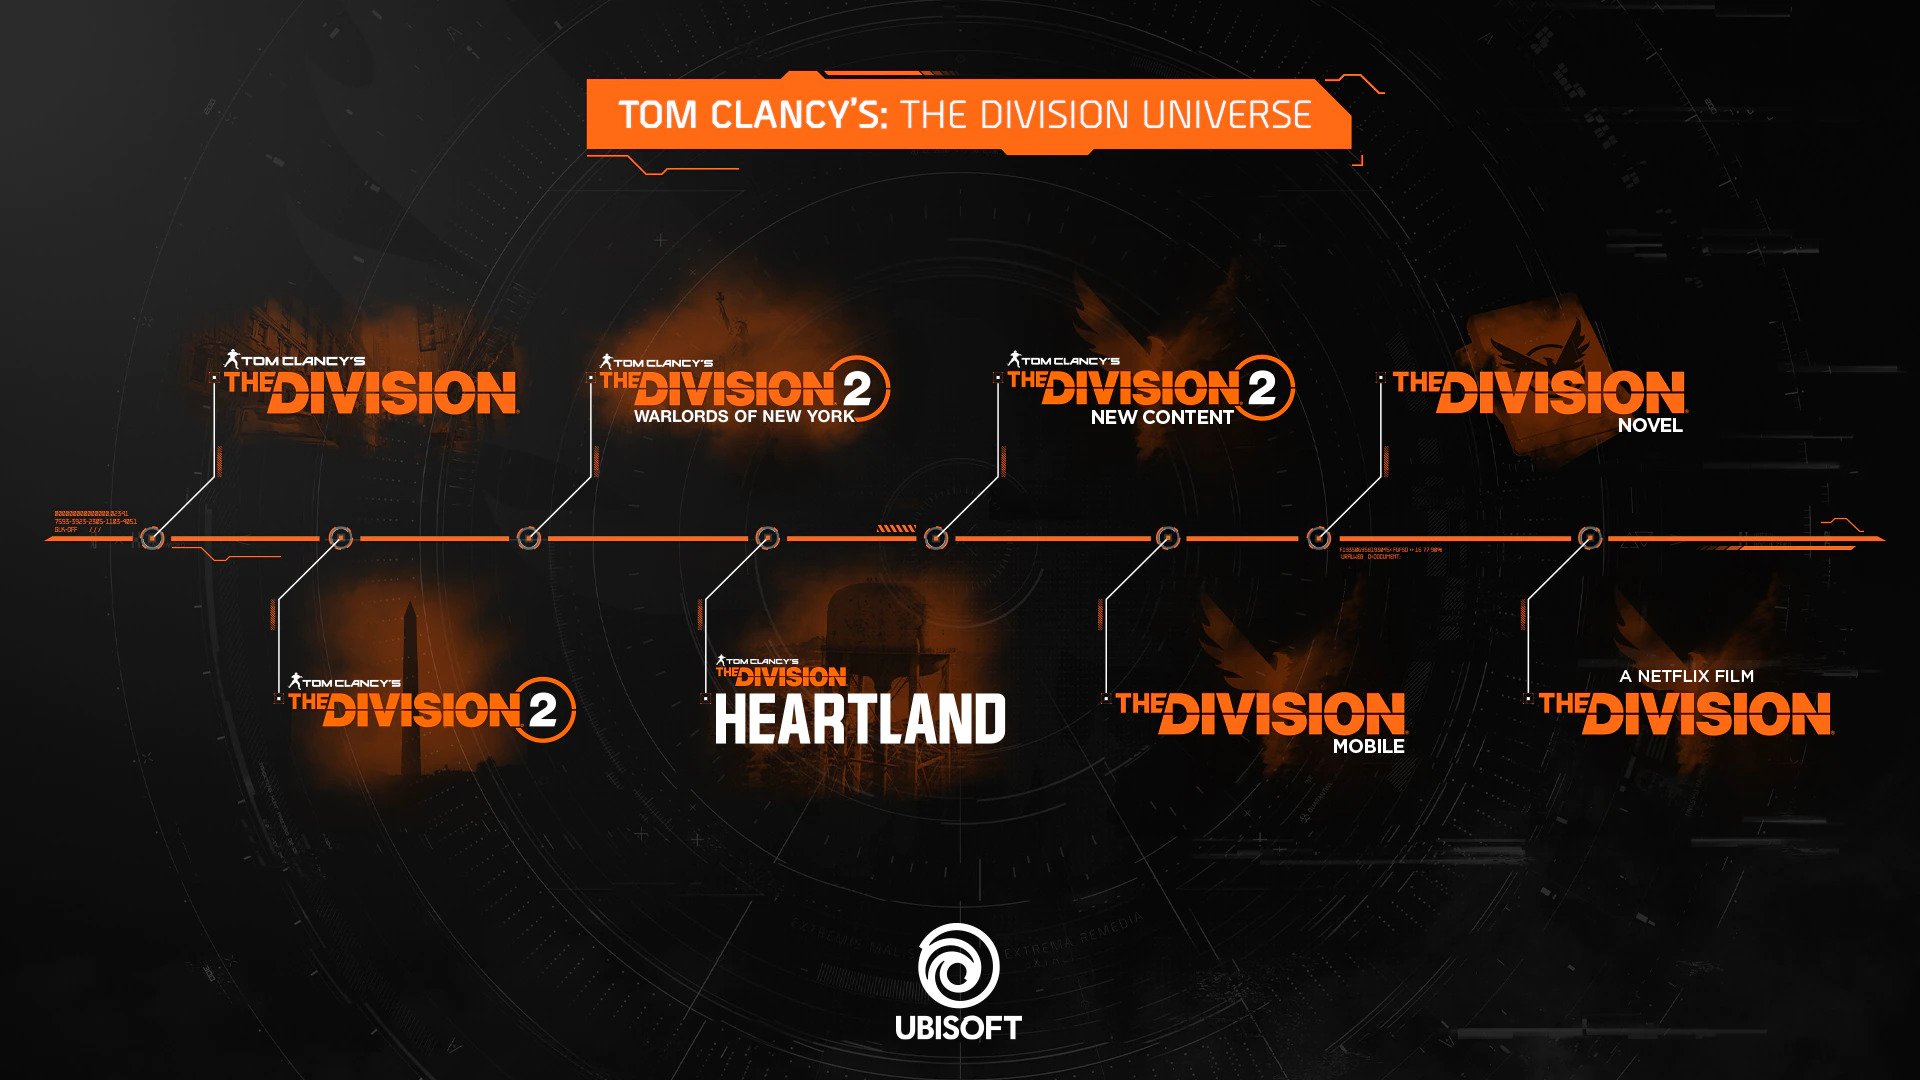 The division 1